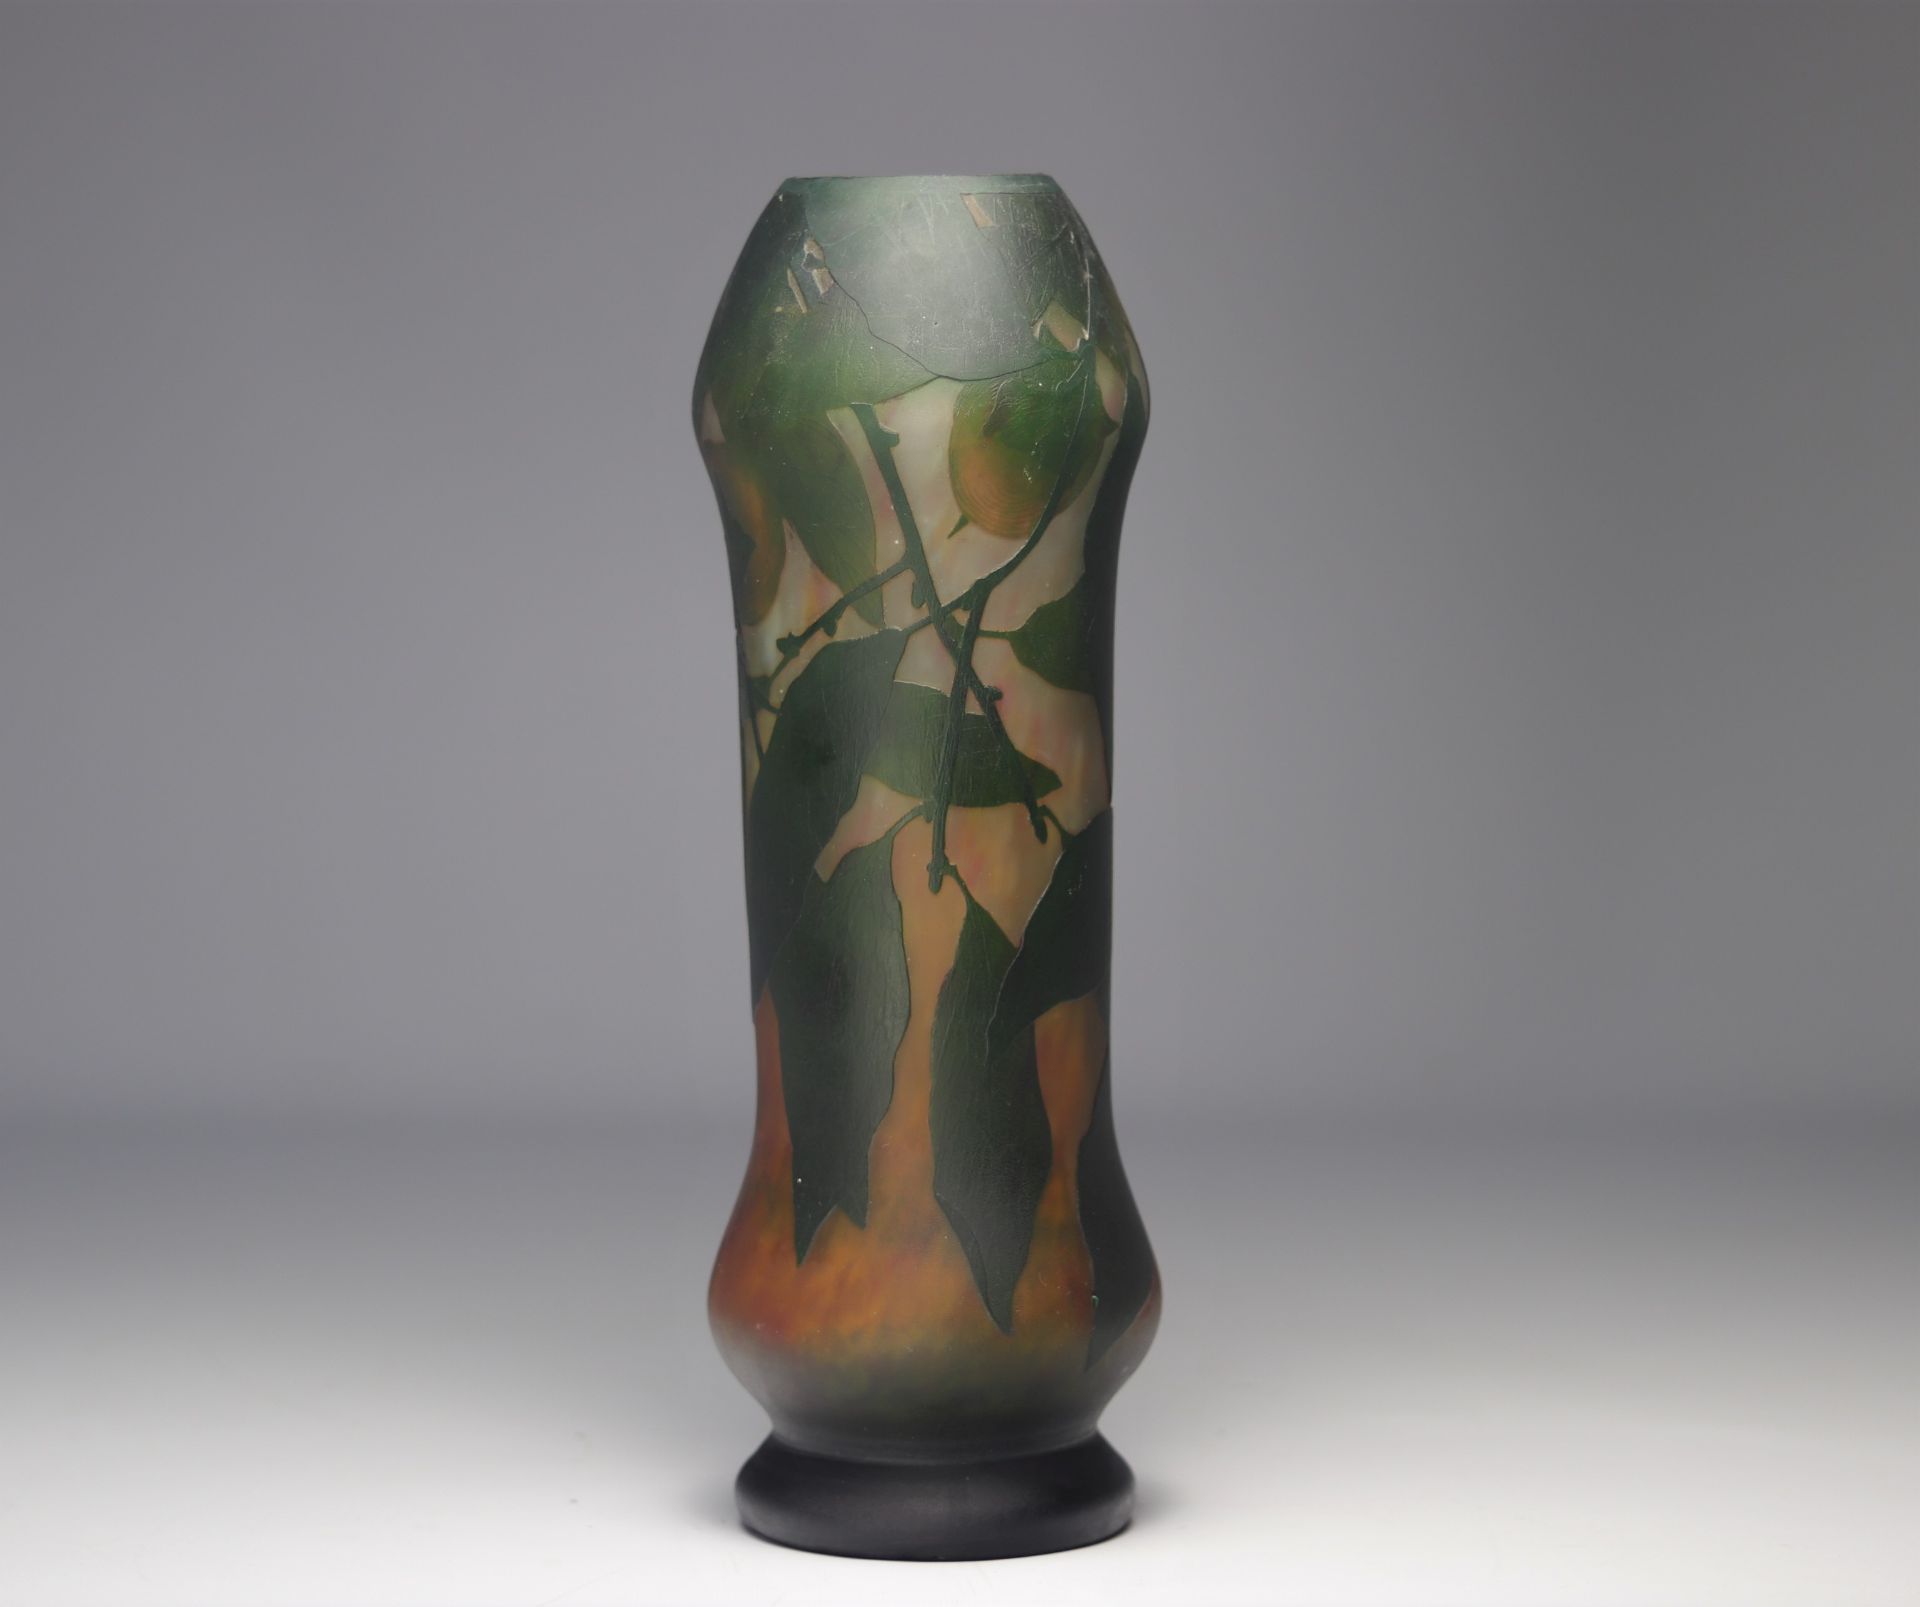 Daum Nancy multi-layered glass vase decorated with khaki on a green and orange mottled background - Image 2 of 4